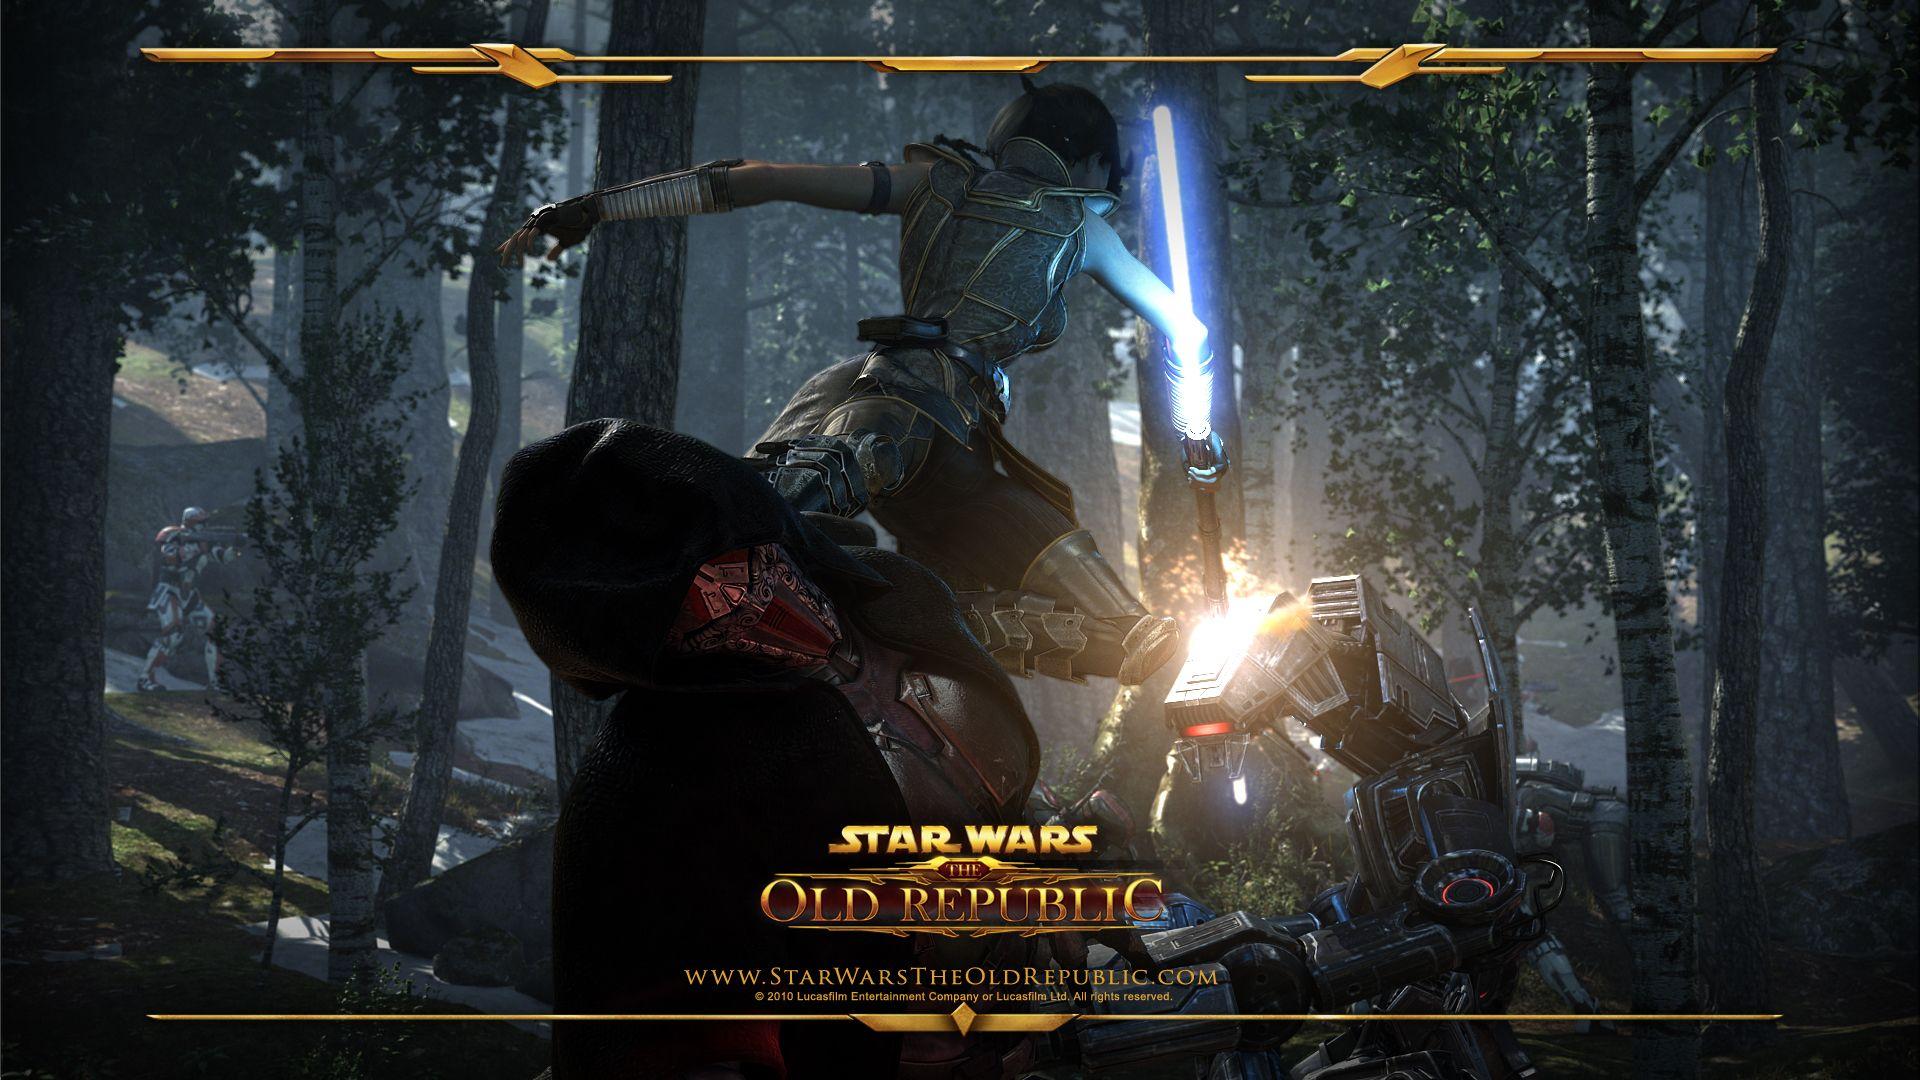 Wars: The Old Republic Wallpapers Jedi Fight